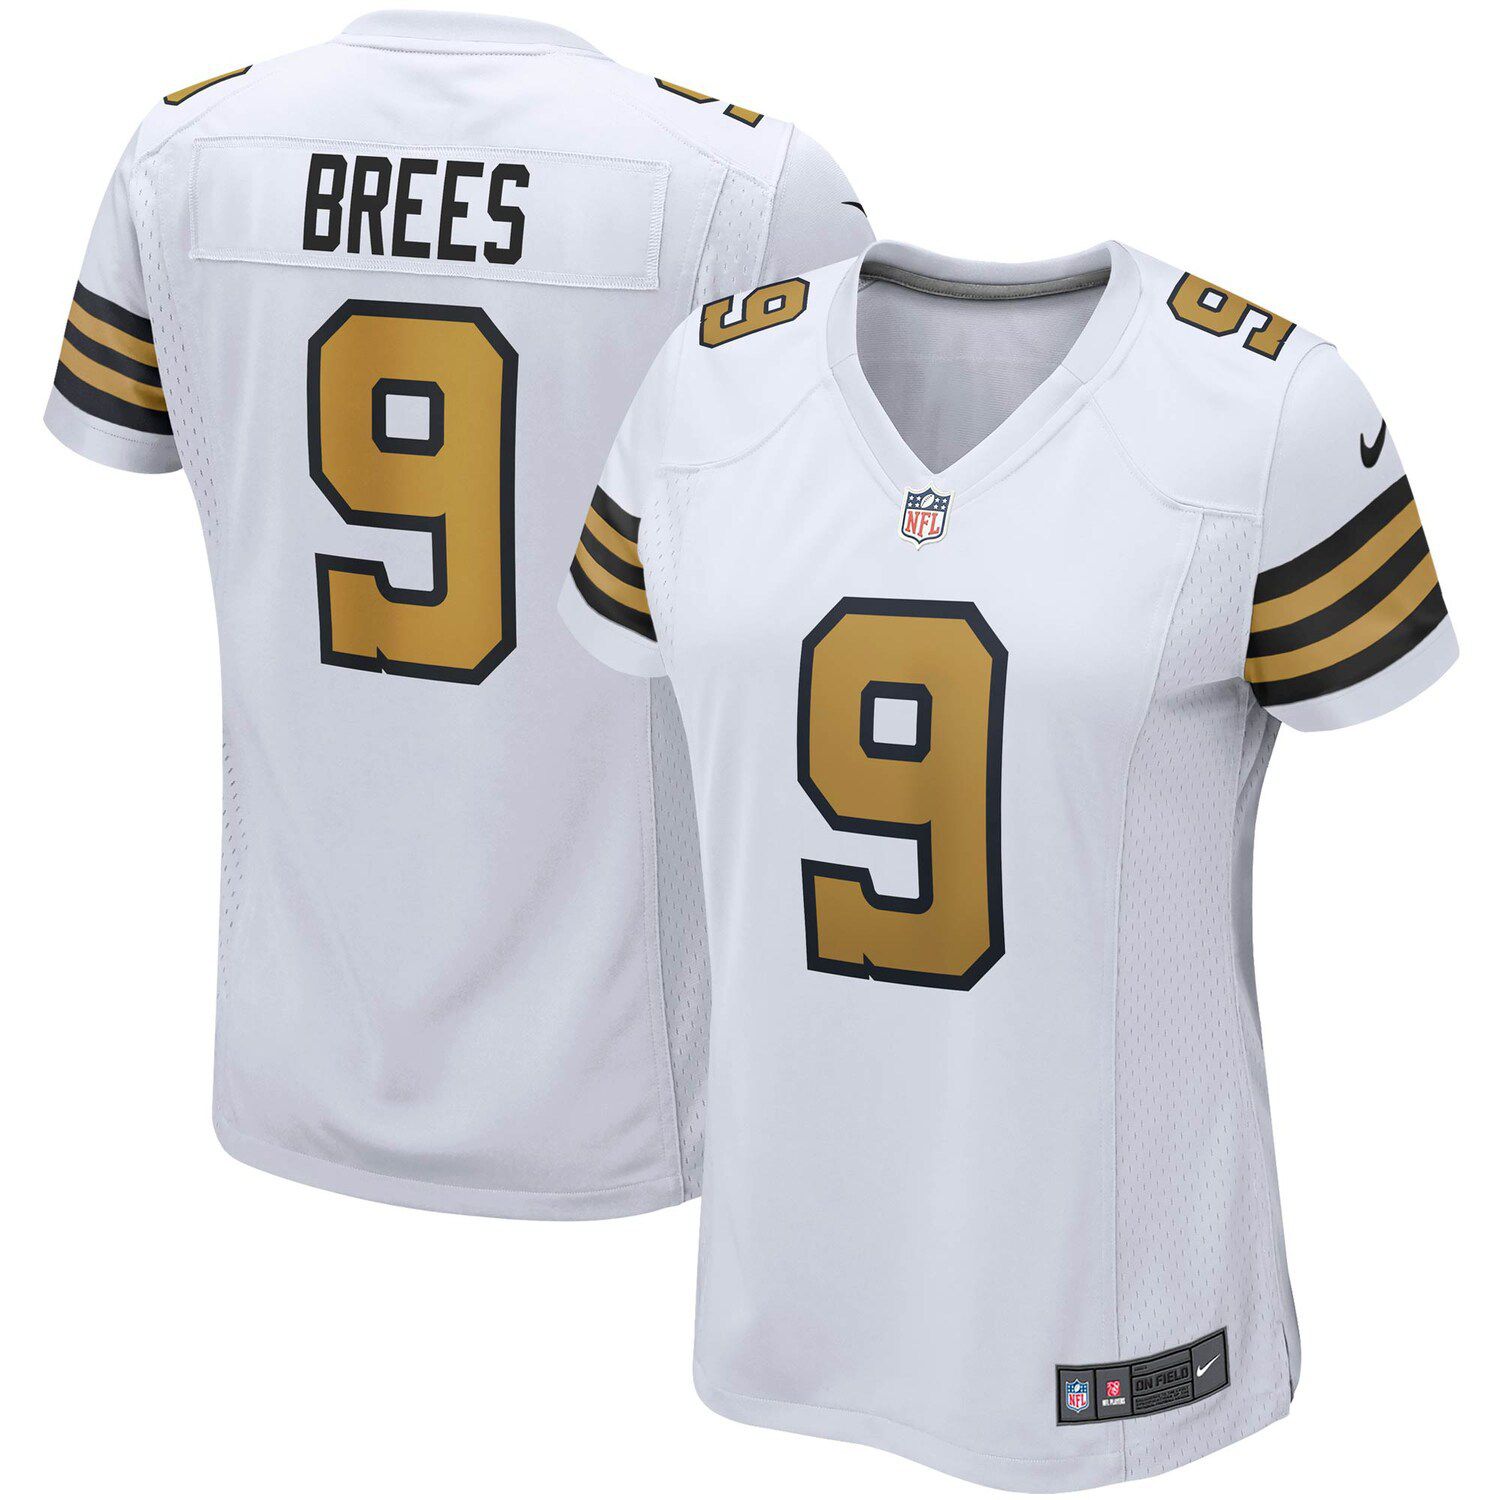 brees jersey